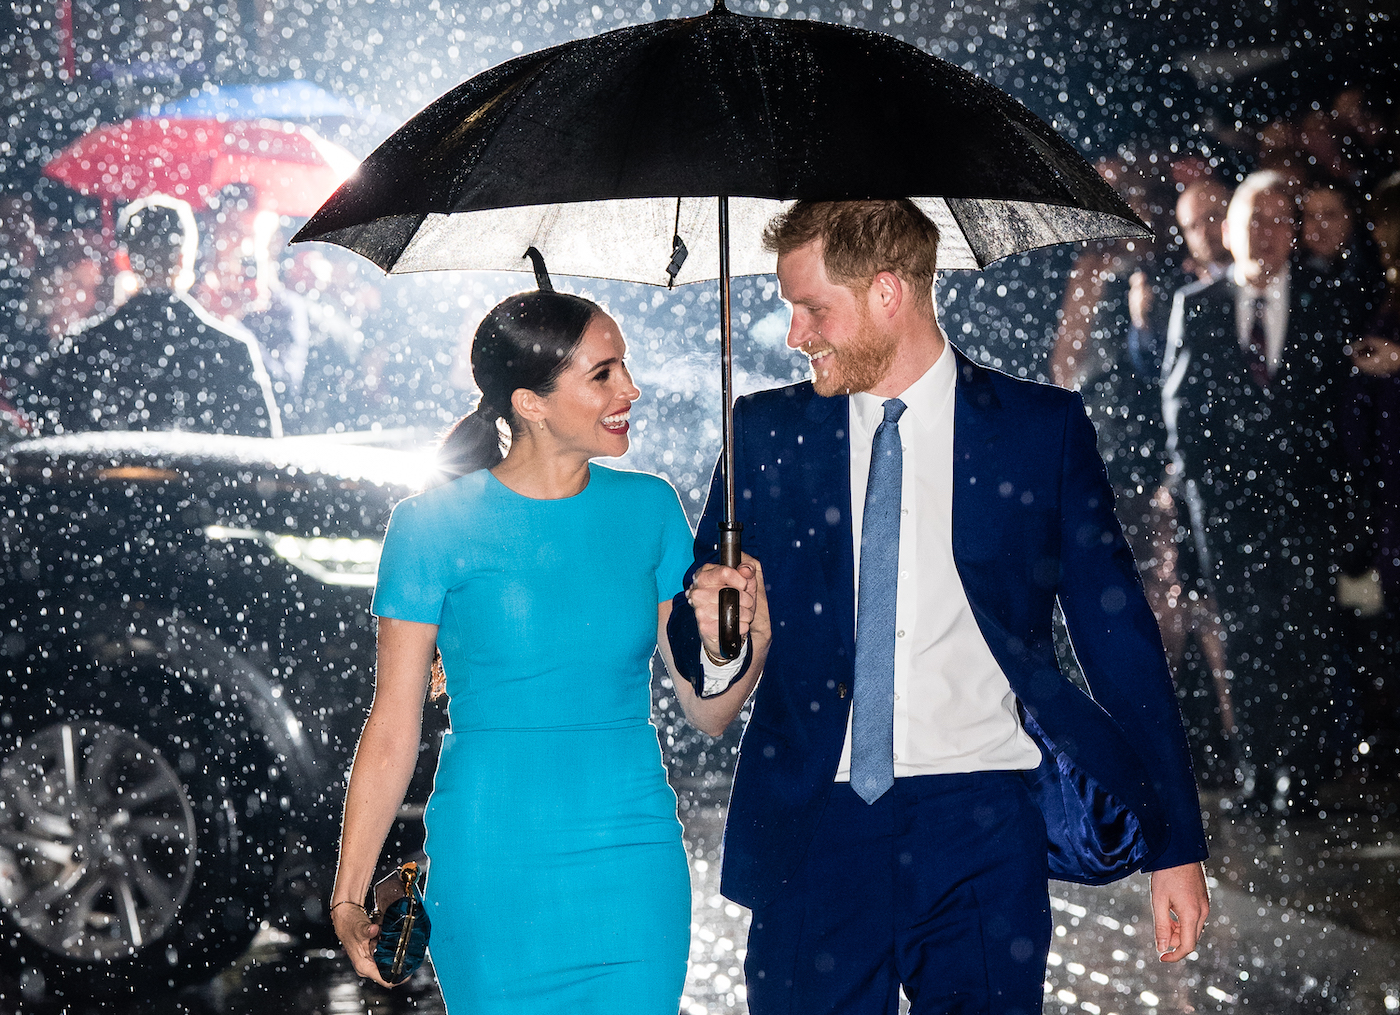 Meghan Markle and Prince Harry attend the 2020 Endeavour Fund Awards holding an umbrella in the rain